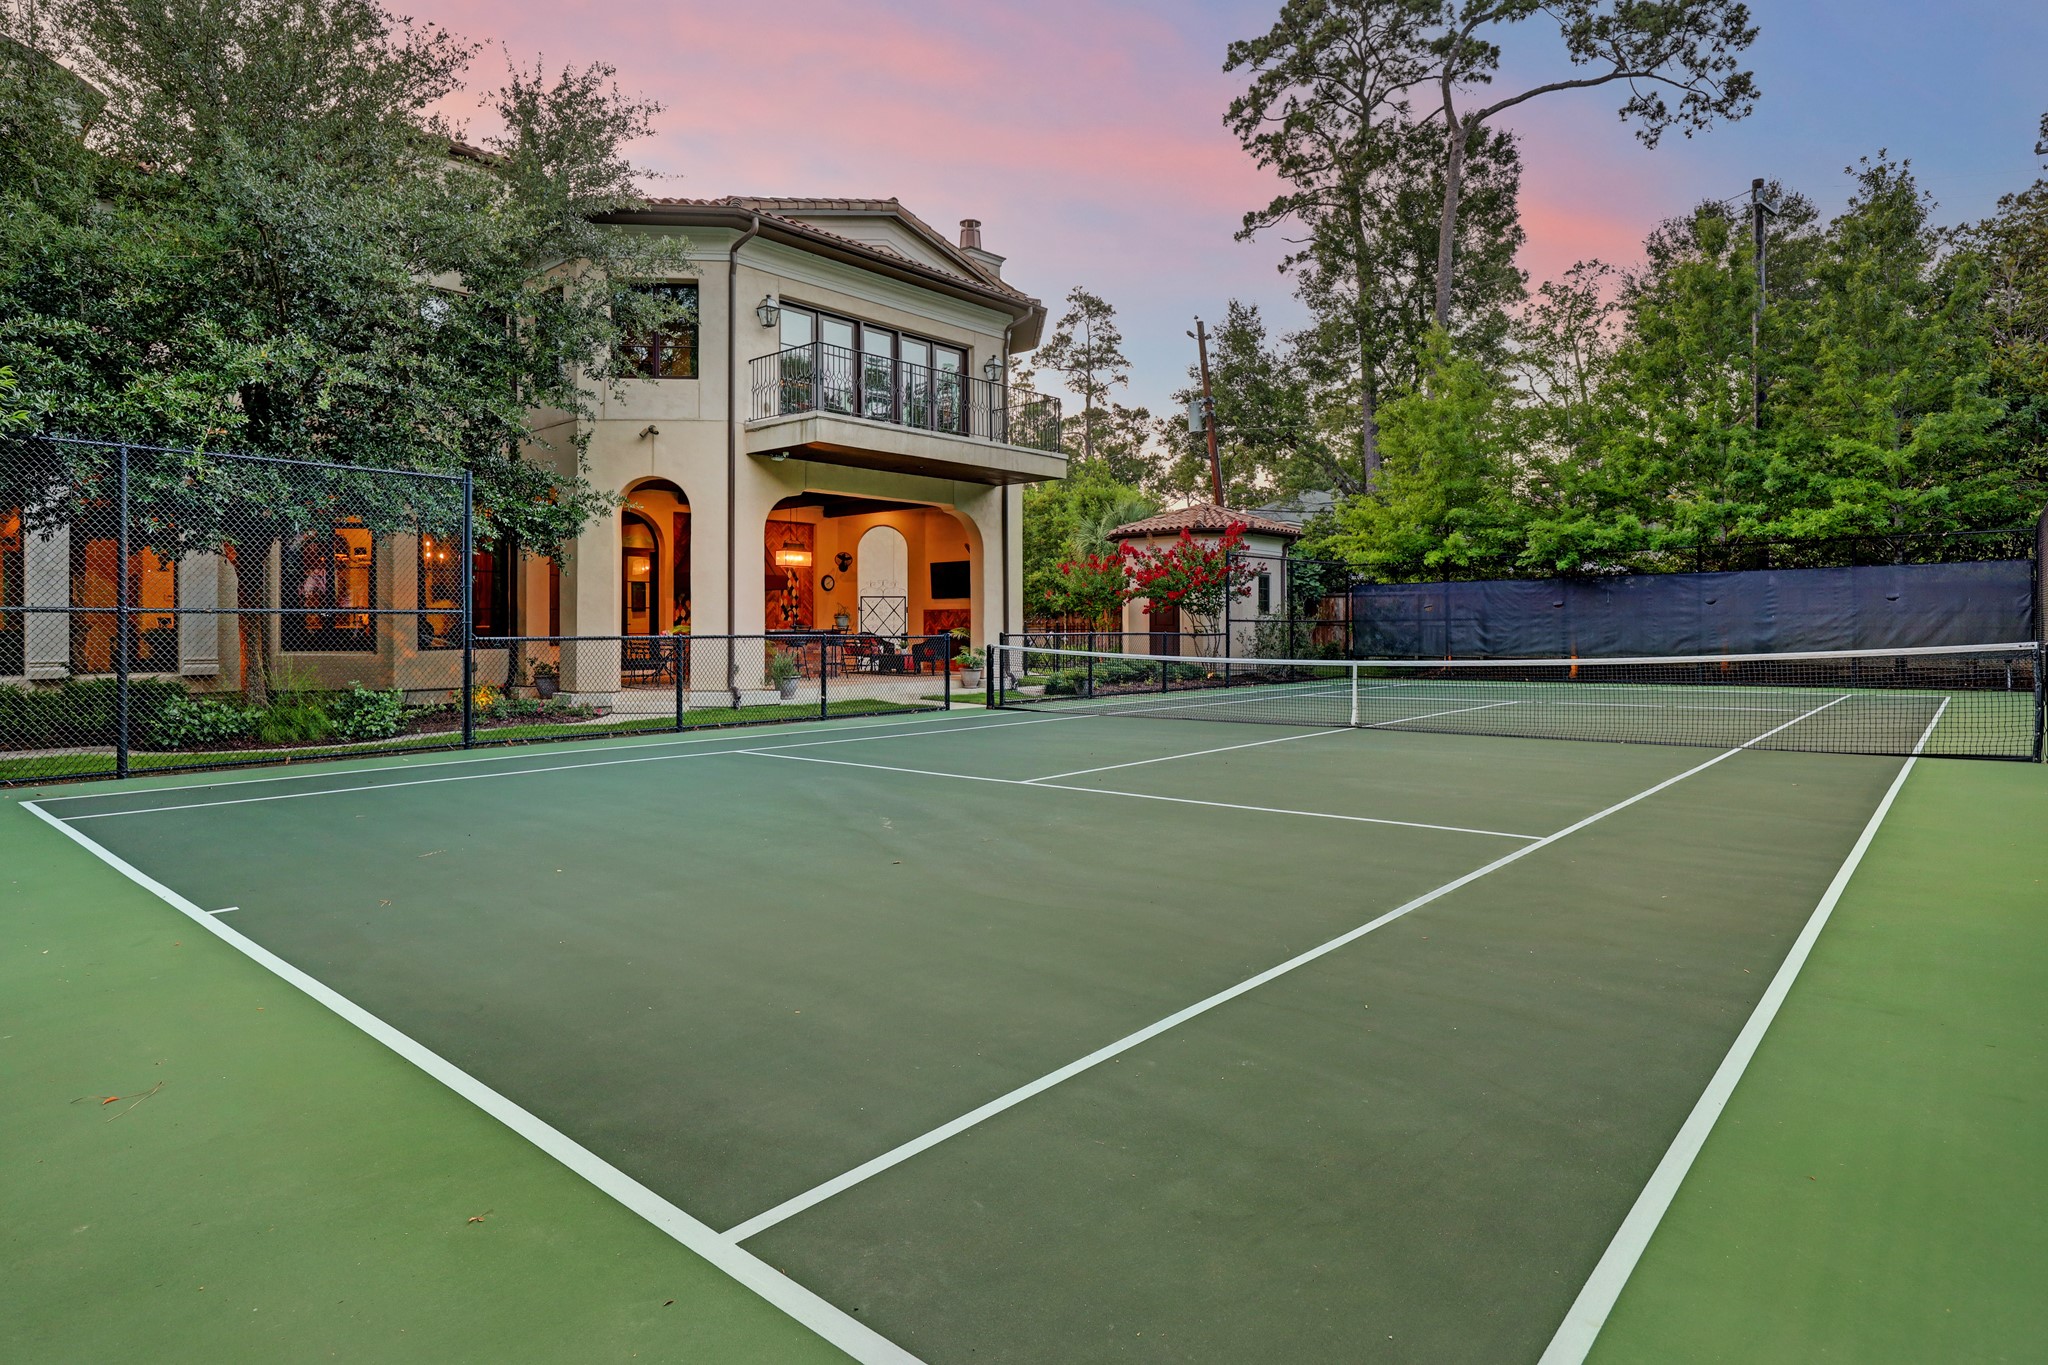 One of the many luxuries this home has to offer is its very own private hard topped tennis court